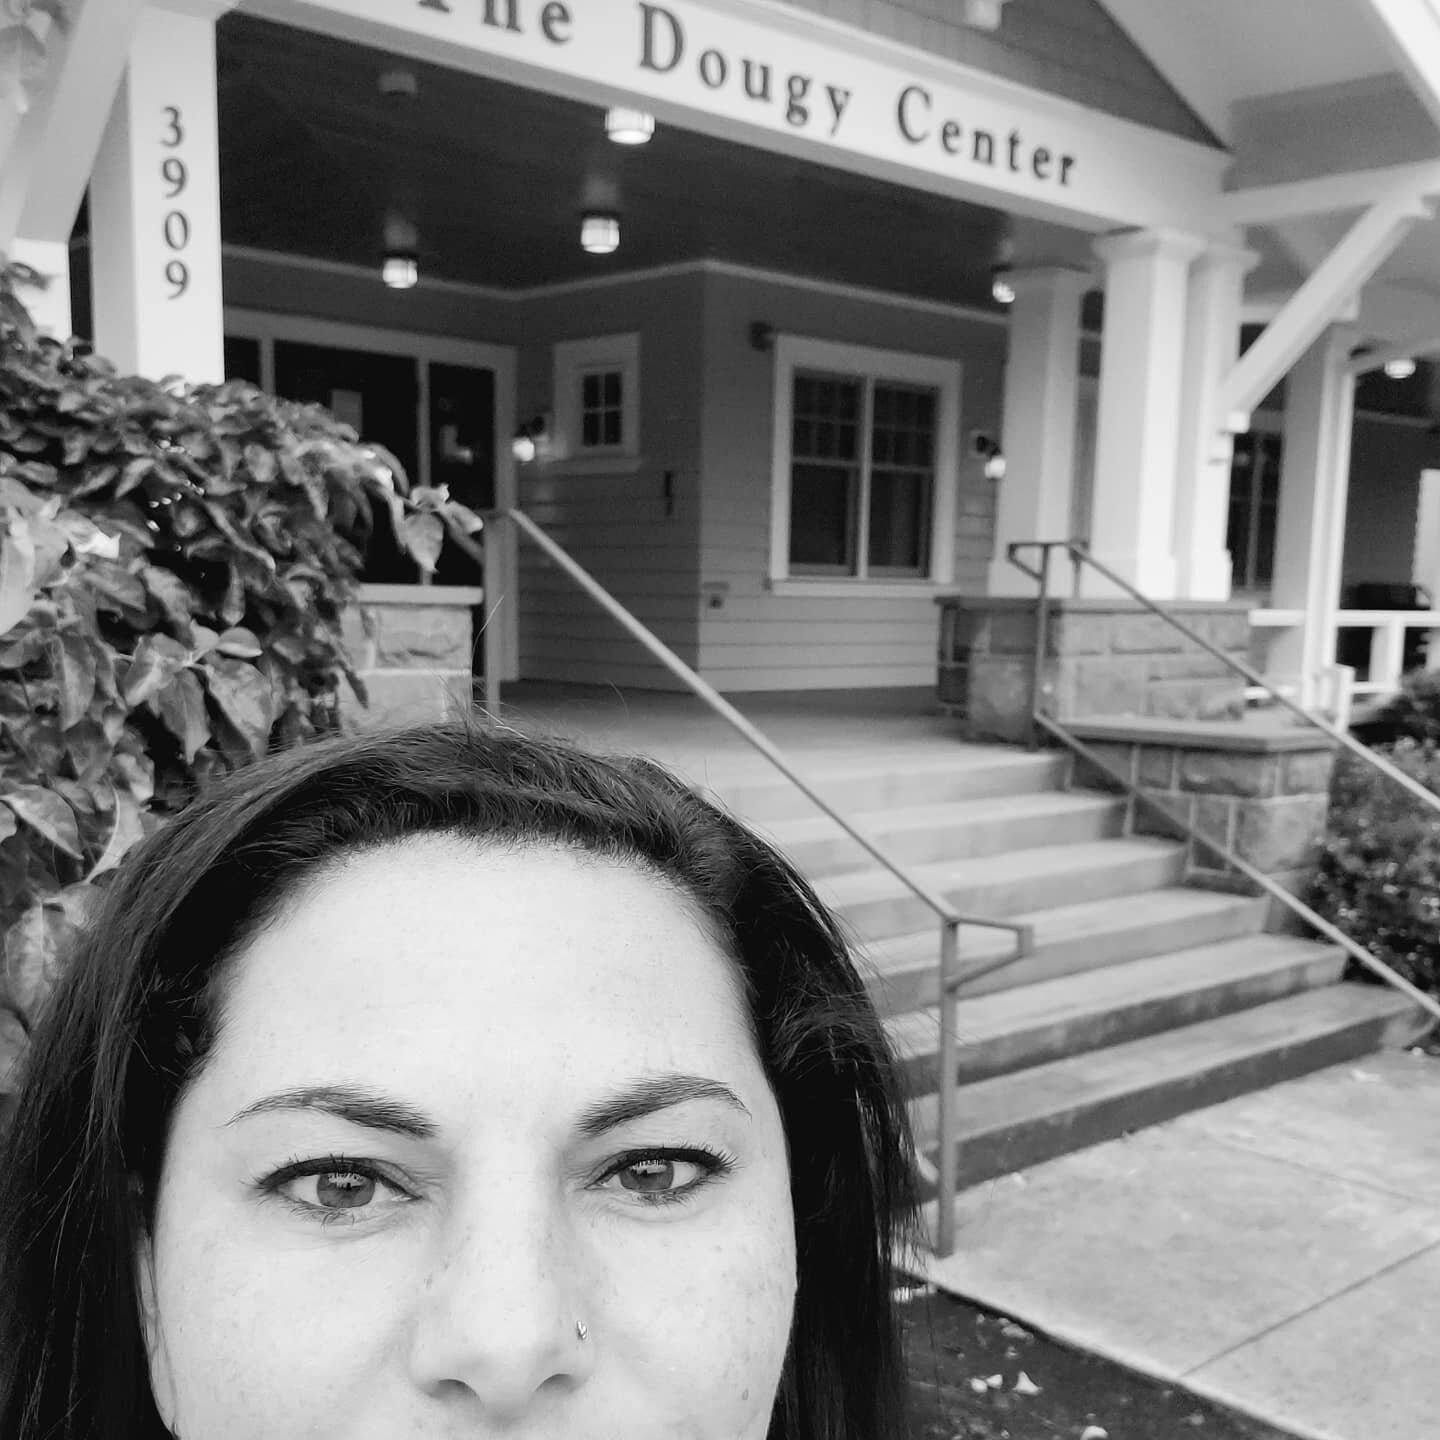 I have a super exciting announcement!!! Today was my first day as a full-time employee at Dougy Center!! For those that don't know, I have been volunteering and subbing at Dougy for the past 12 years. When I first started, I used to dream of working 